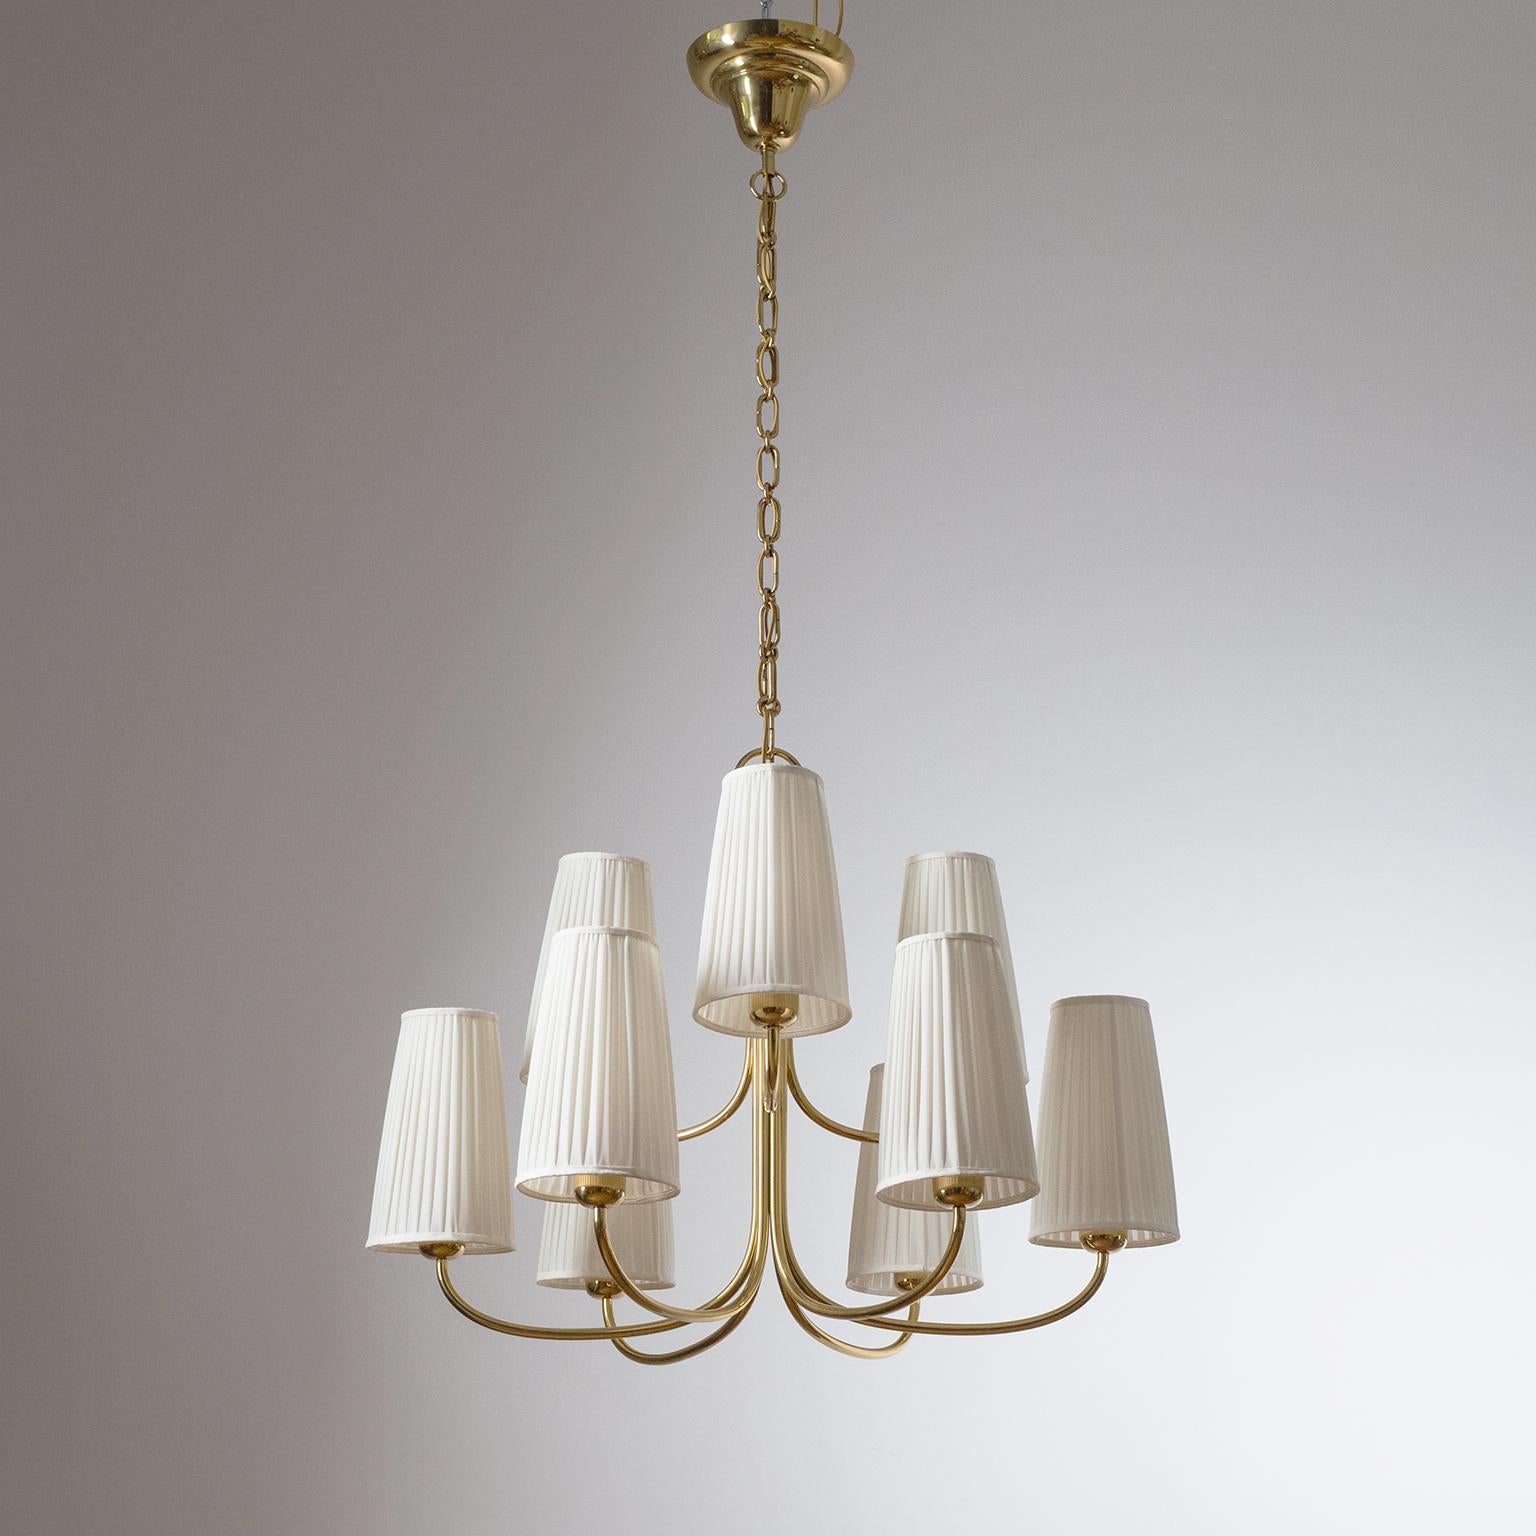 Rare large 9-arm brass chandelier by J.T. Kalmar produced in the 1940s. Beautiful 'cloud of light' most likely designed by Josef Frank, circa 1930. The Minimalist brass arms are arranged in two tiers, each holding a large original shade with new